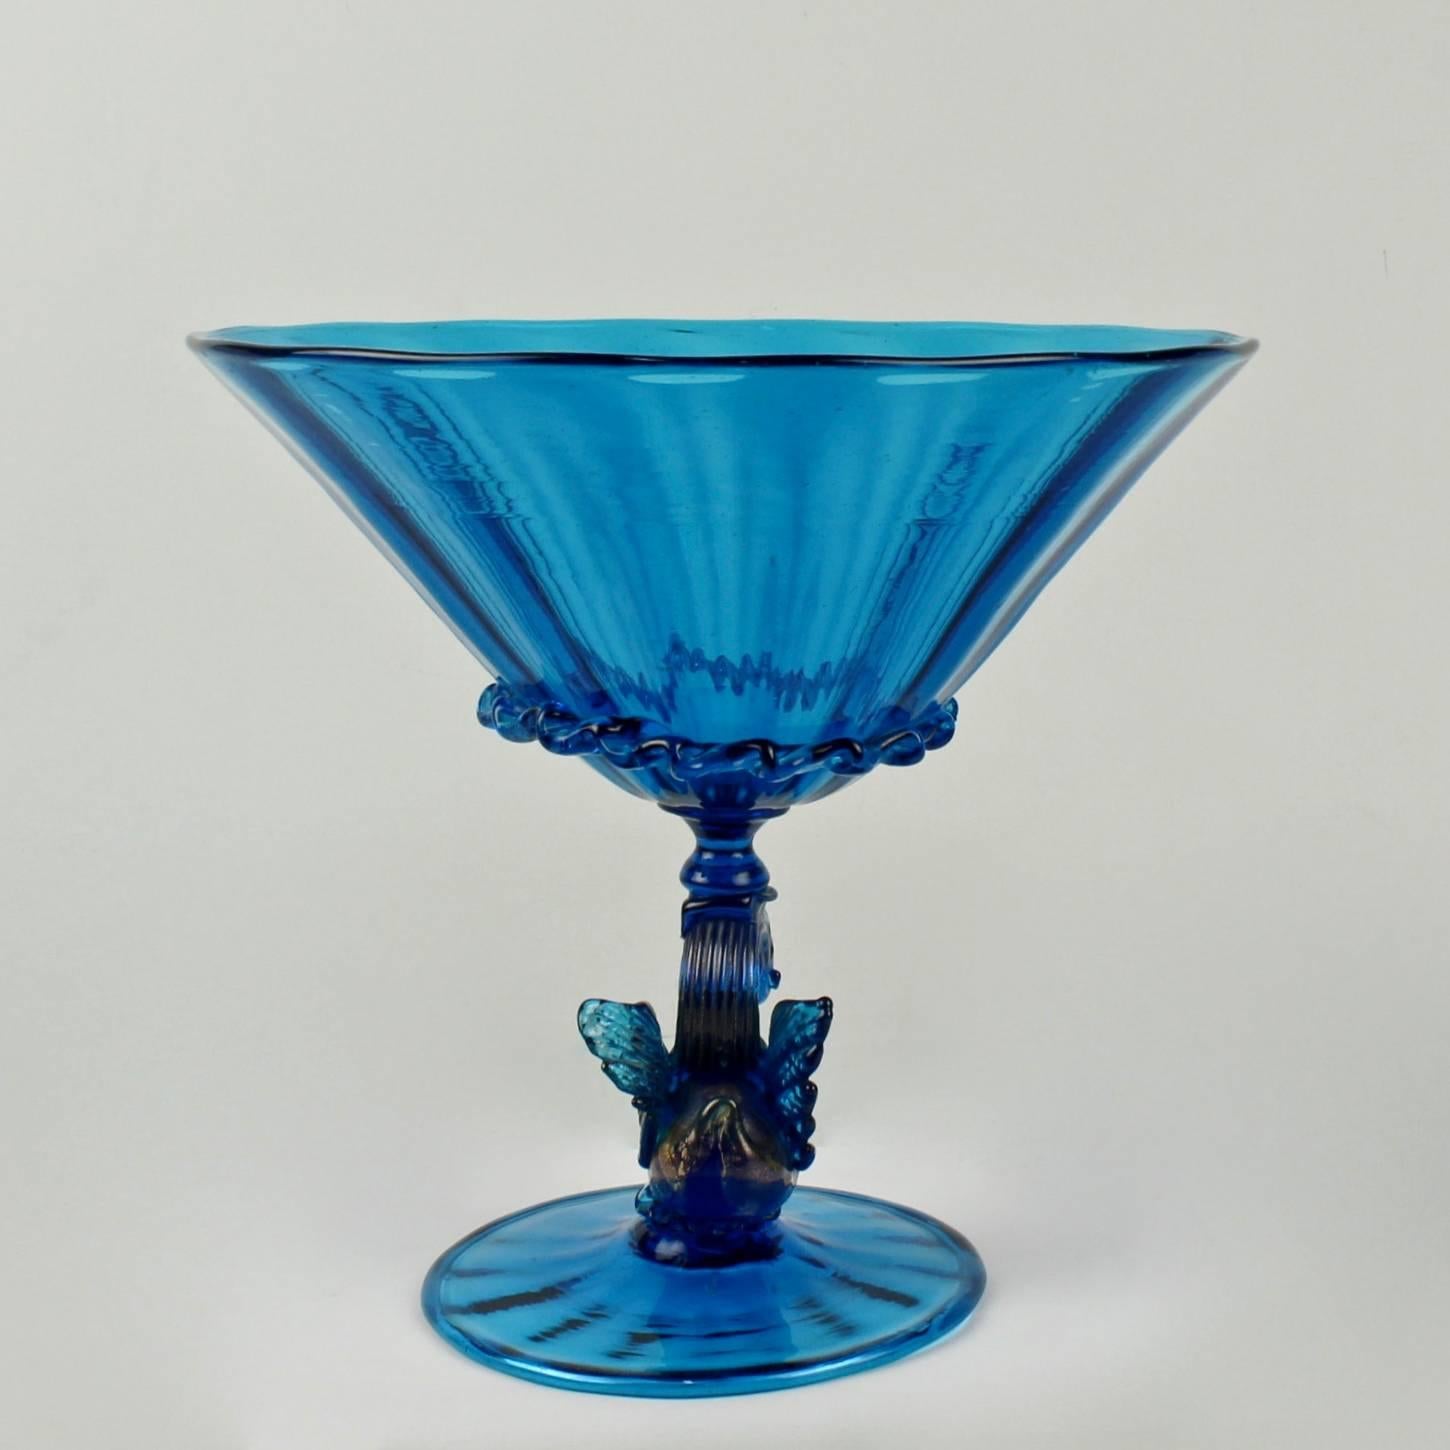 A large blue venetian glass footed bowl.

Likely Salviati with ribbed swirl design in the bowl and footed, applied rigaree band to the bowl, and a figural swan support with gold fleck. 

The bowl has a slight lean to one side, and the base has a